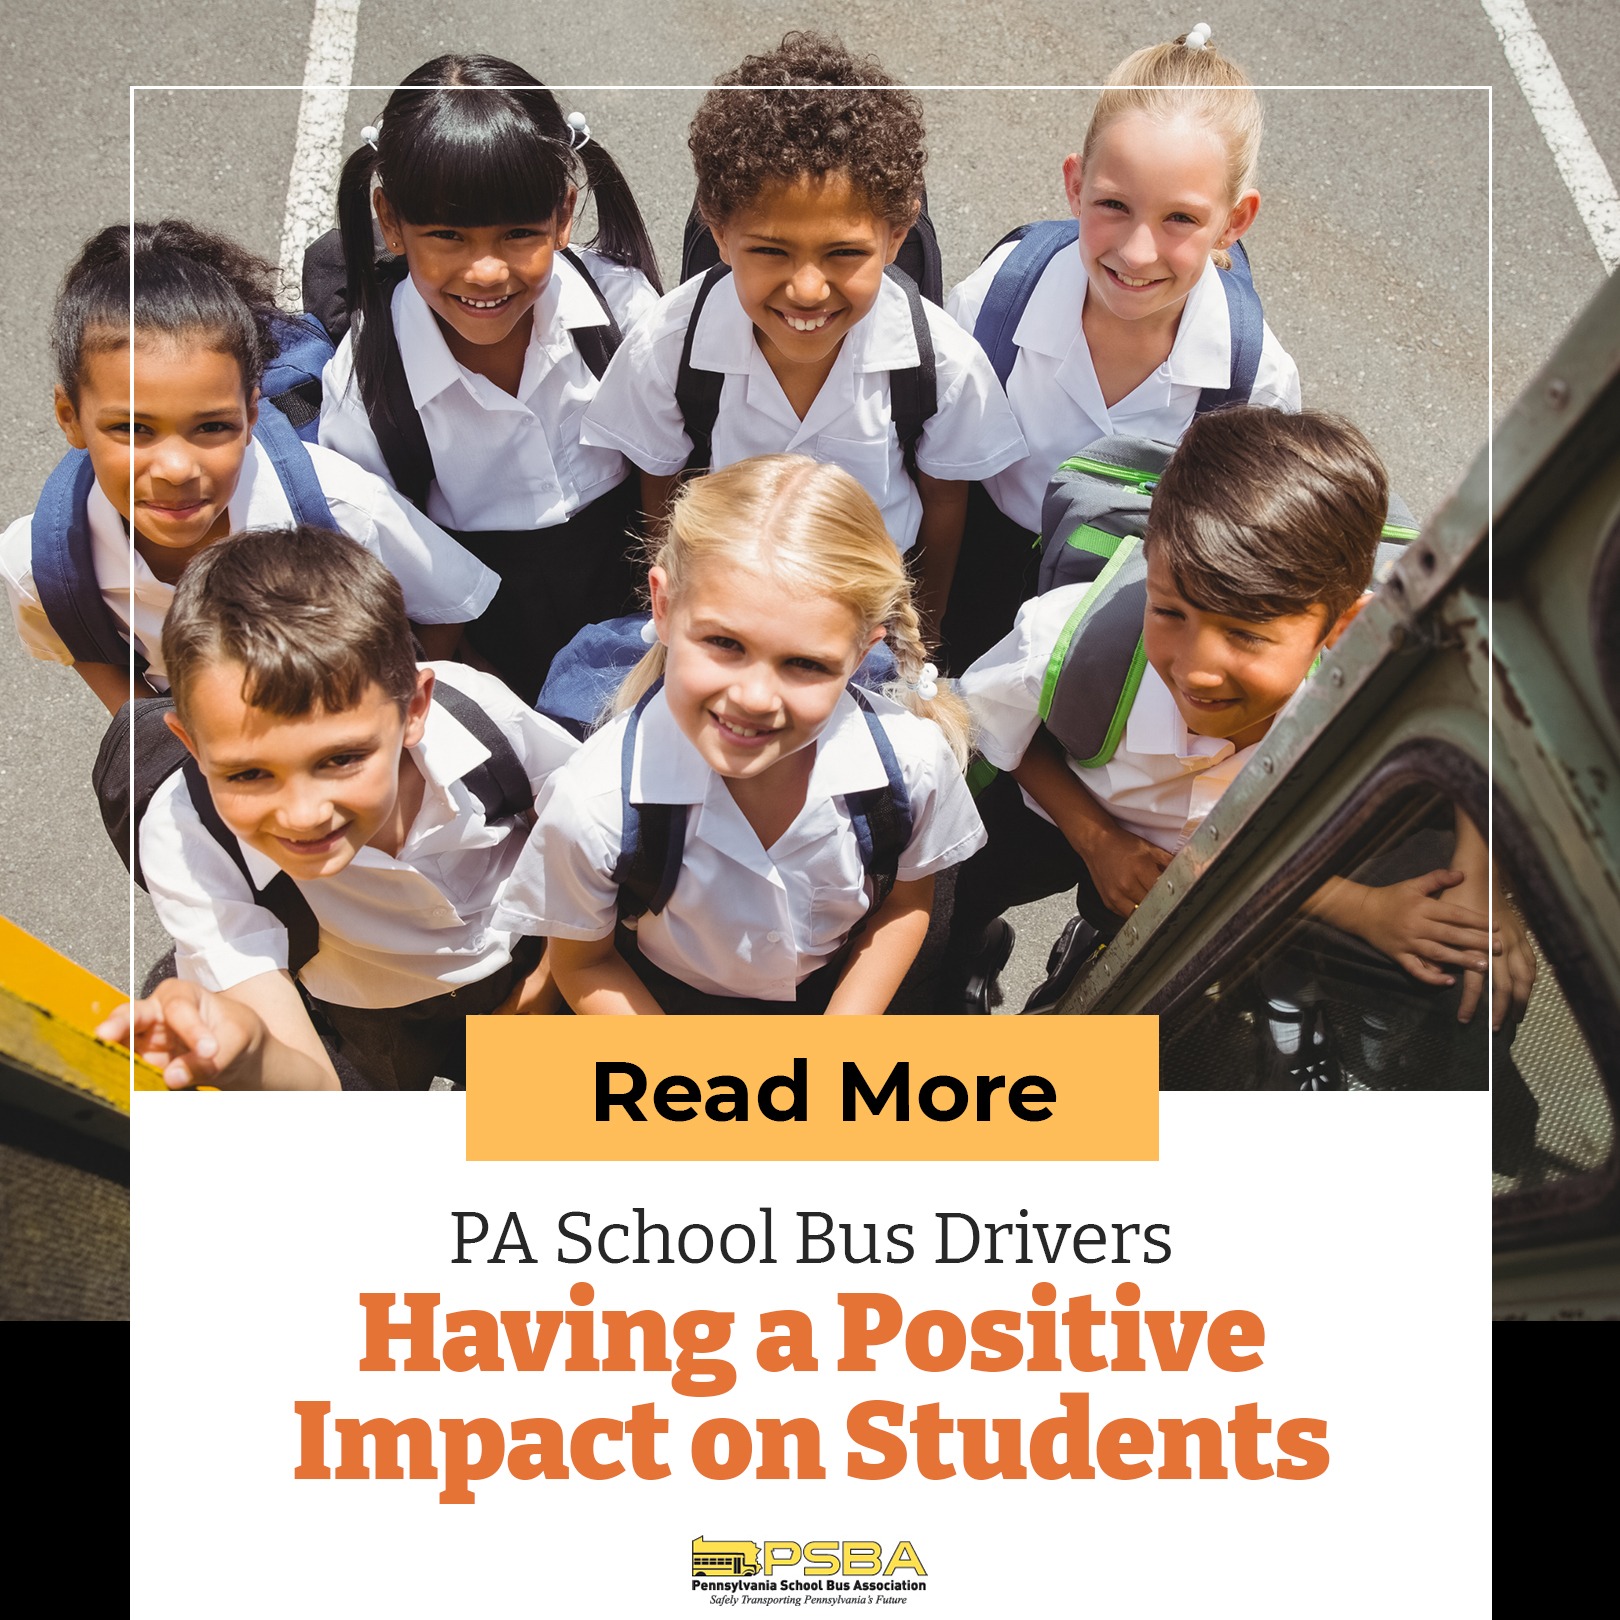 PA School Bus Drivers Having a Positive Impact on Students